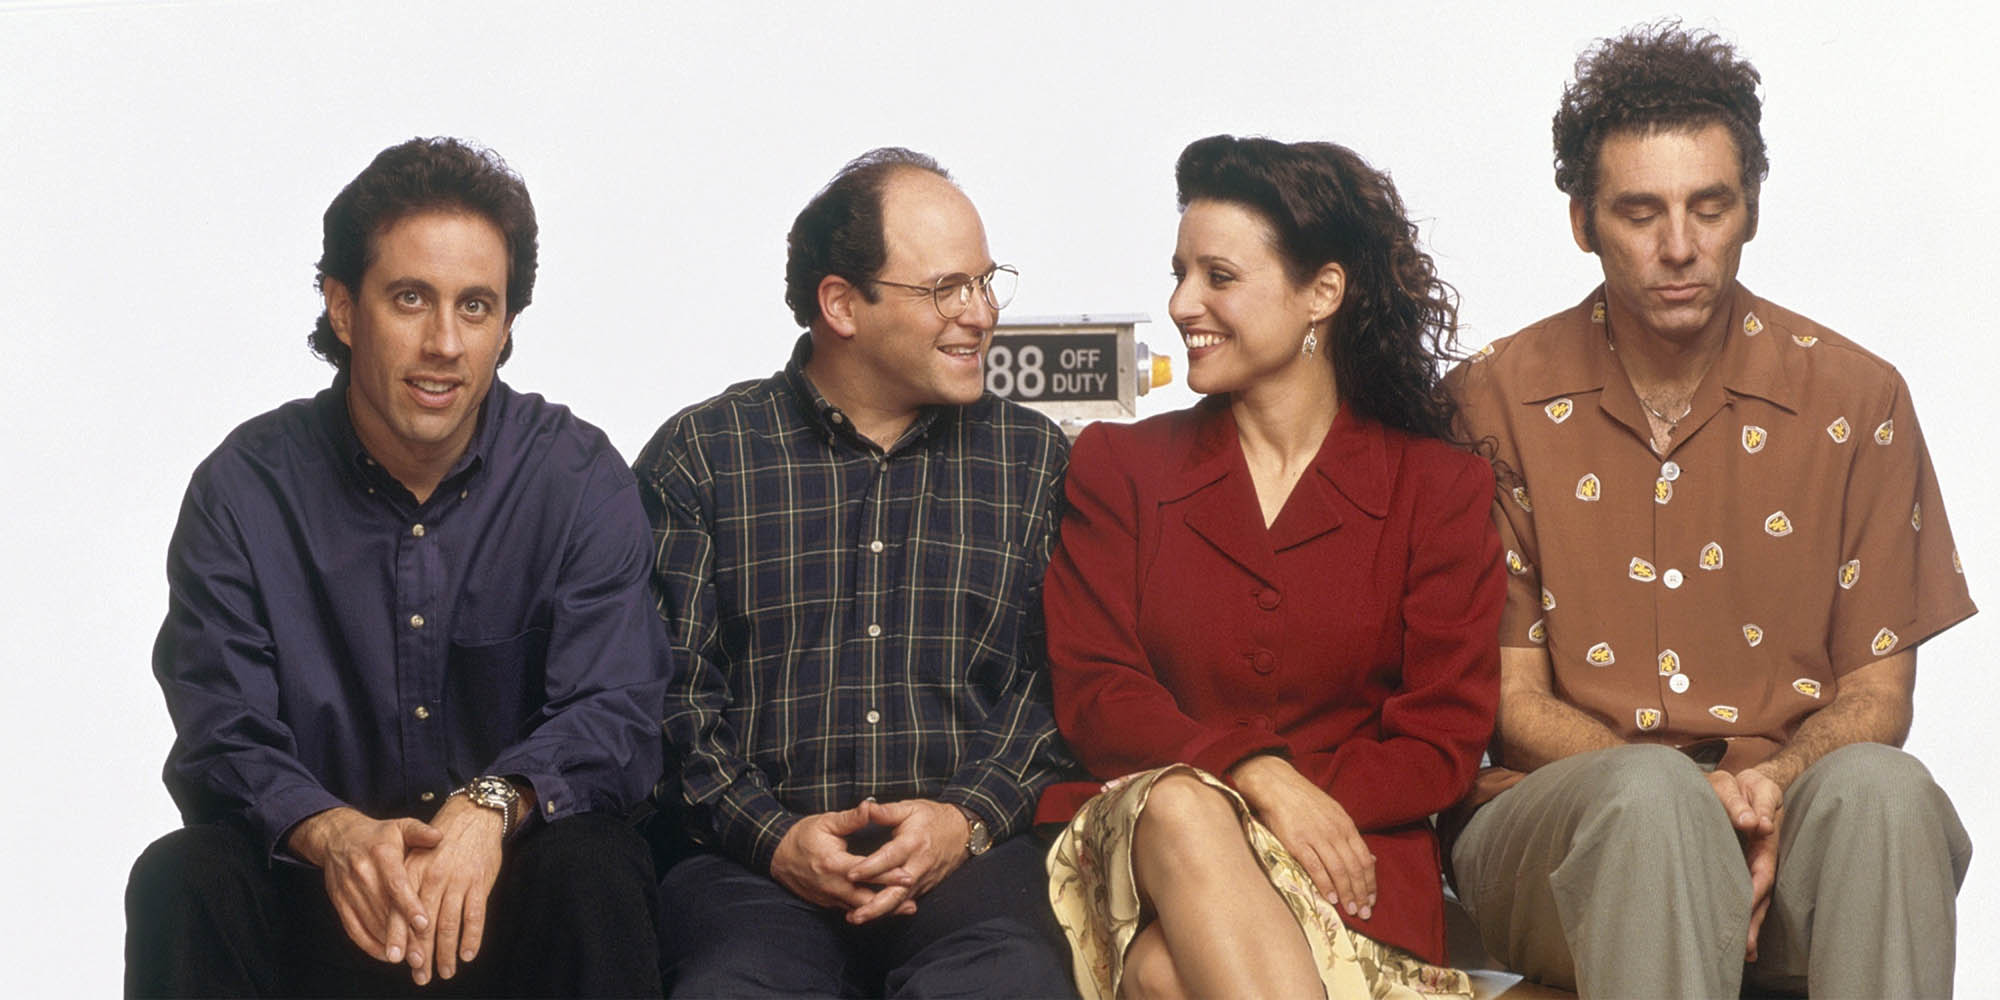 ‘Seinfeld’ may be a classic sitcom, but it's not perfect. Here are the cast moments that constantly make us cringe.